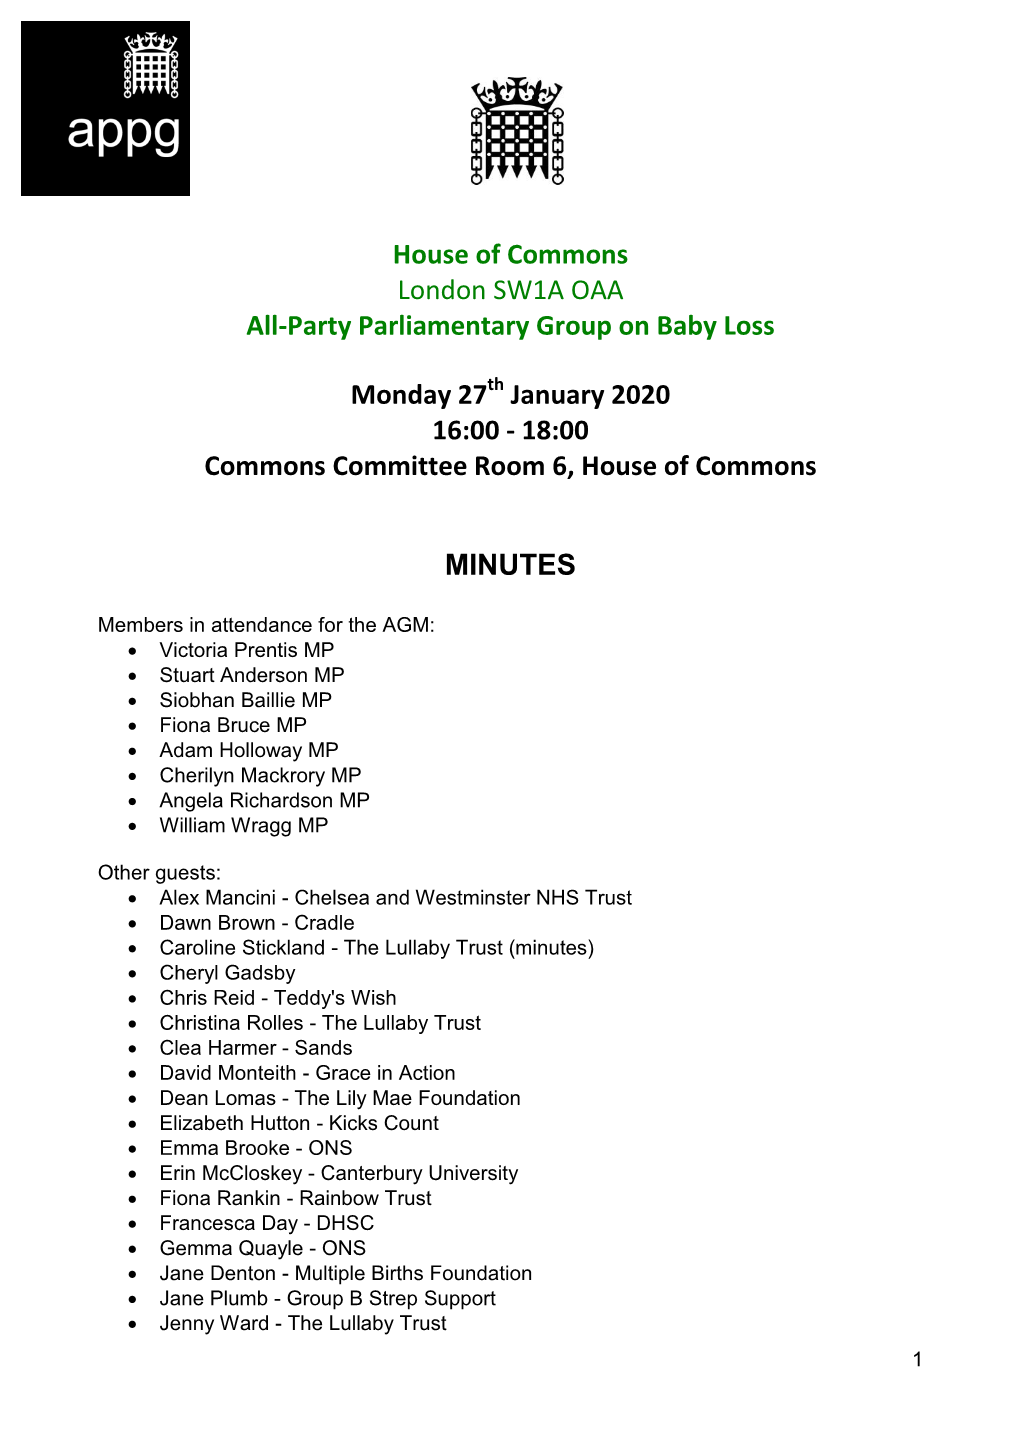 Minutes of the APPG on Baby Loss